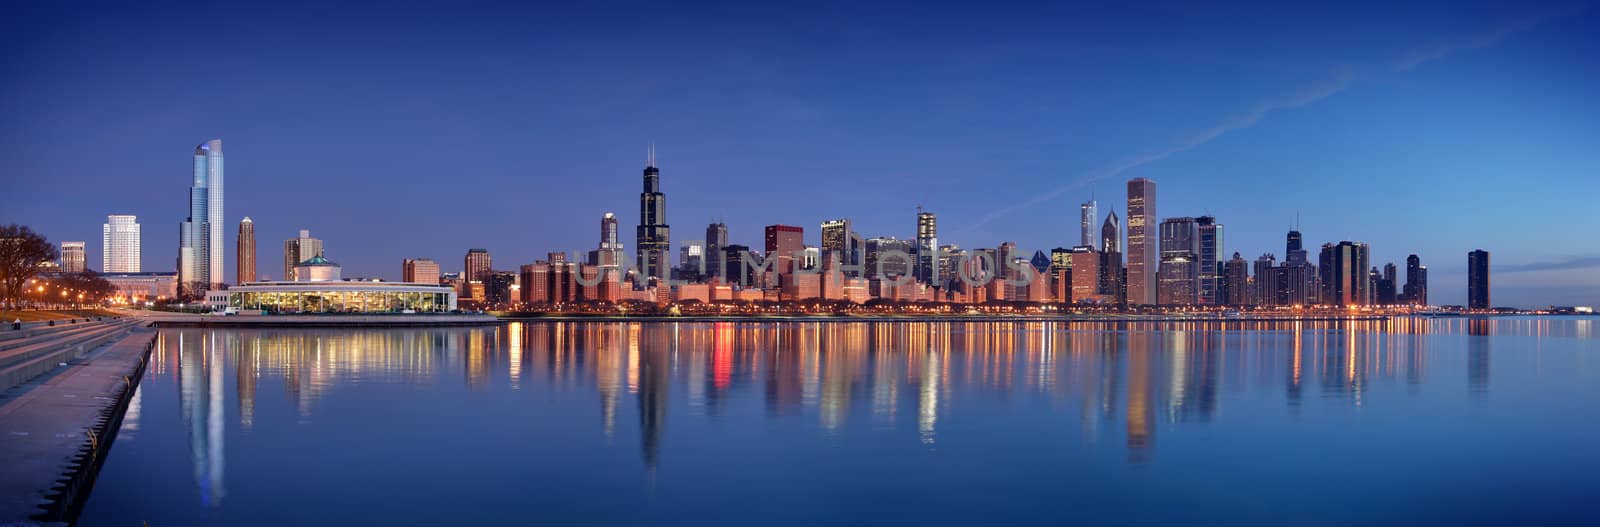 Chicago city skyline in the evening with reflection of the skyscrappers on the water